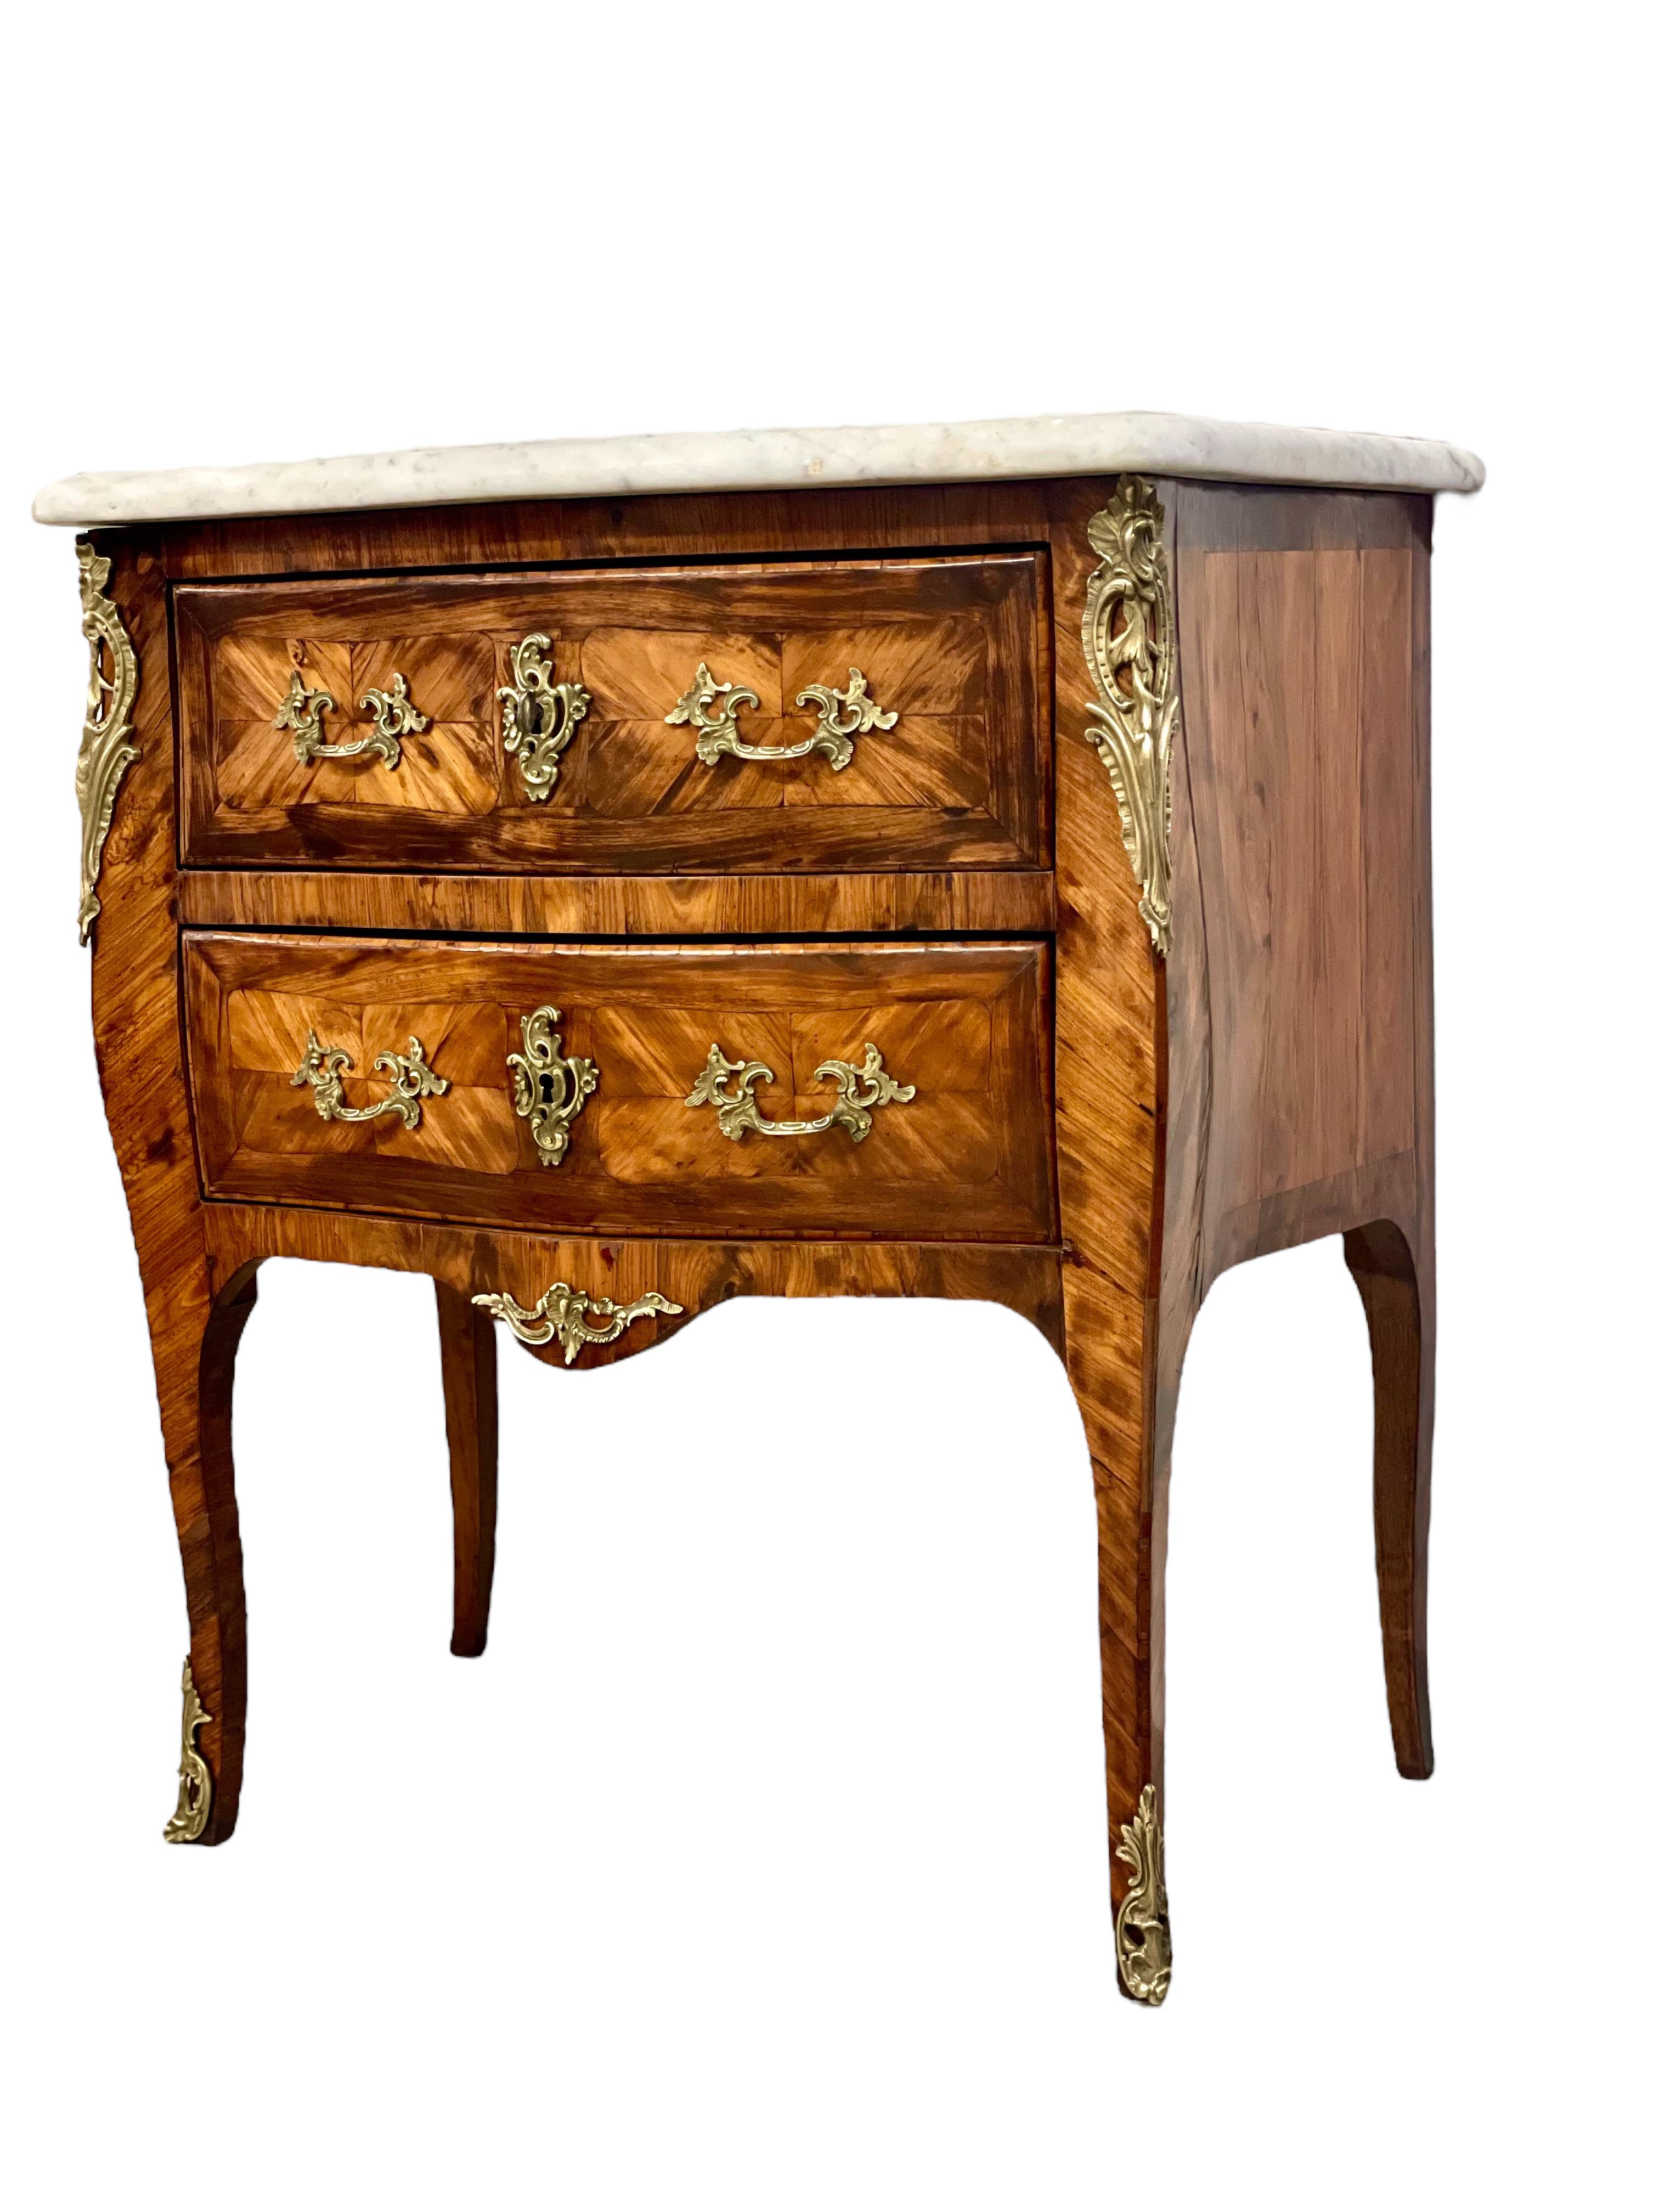 A stylish and petite Louis XV style two-drawer marquetry commode, with a curved front and sides and a shaped and polished grey-veined marble top. This very attractive chest of drawers is decorated throughout with intricate diagonally set veneers,